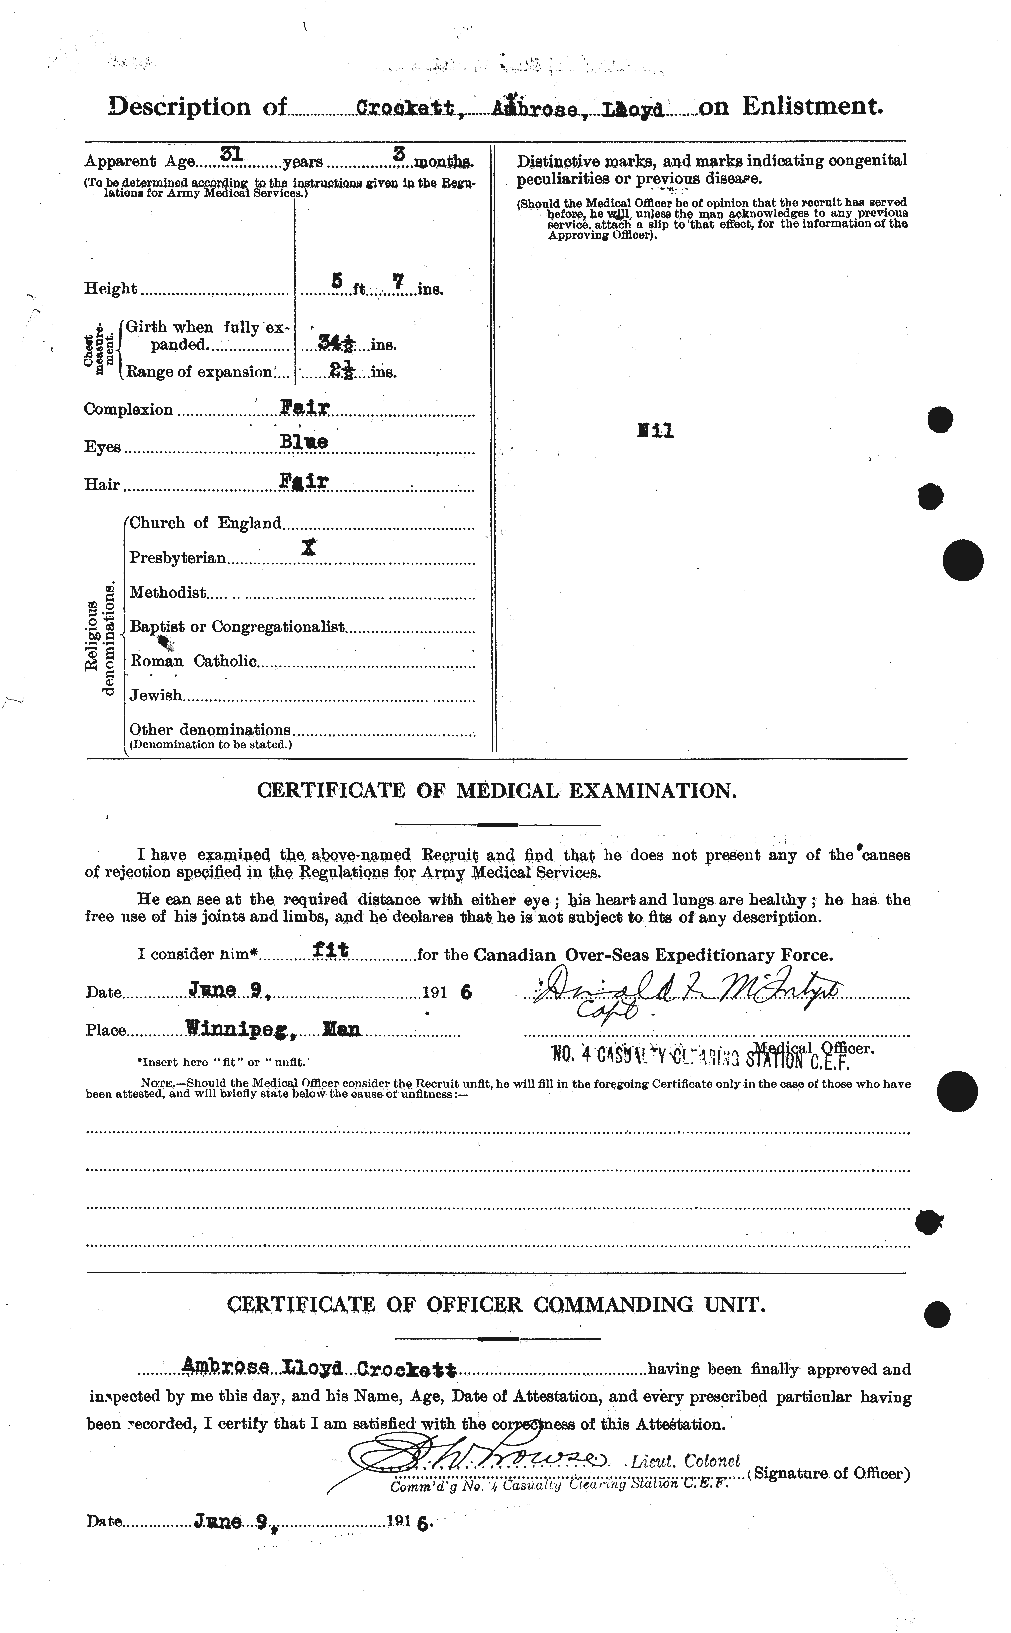 Personnel Records of the First World War - CEF 064726b